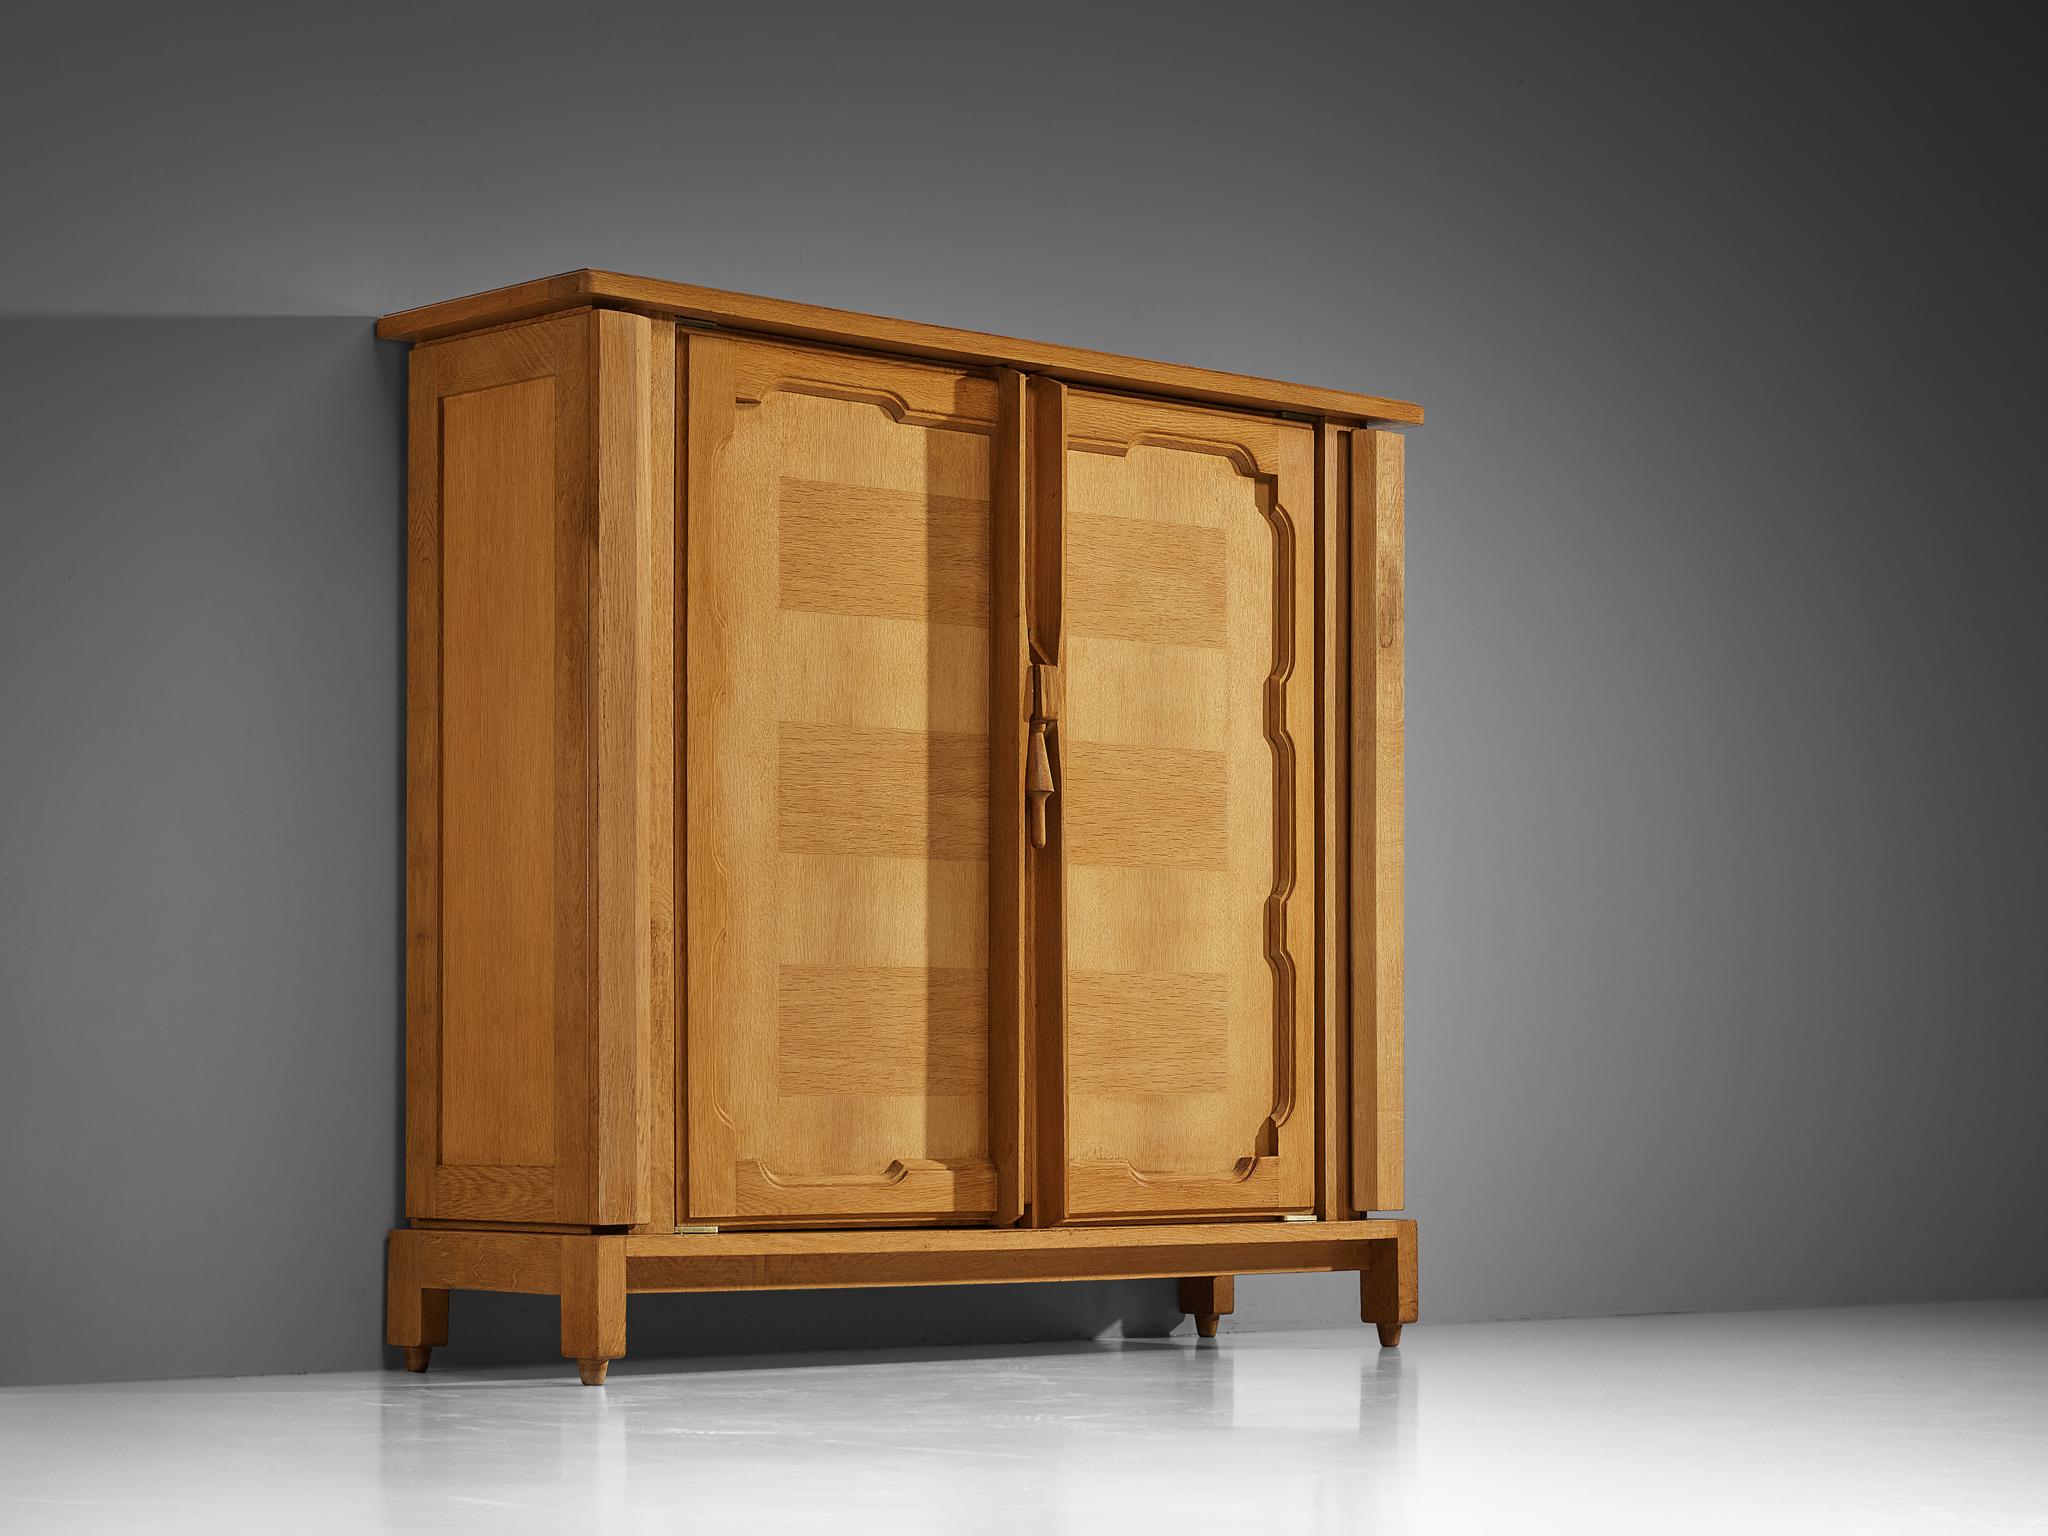 Guillerme et Chambron for Votre Maison, 'Bouvine' cabinet, oak, France, 1960s


Step into timeless elegance with this meticulously crafted case piece designed by the renowned artisans Guillerme and Chambron. Adorned with exquisite attention to